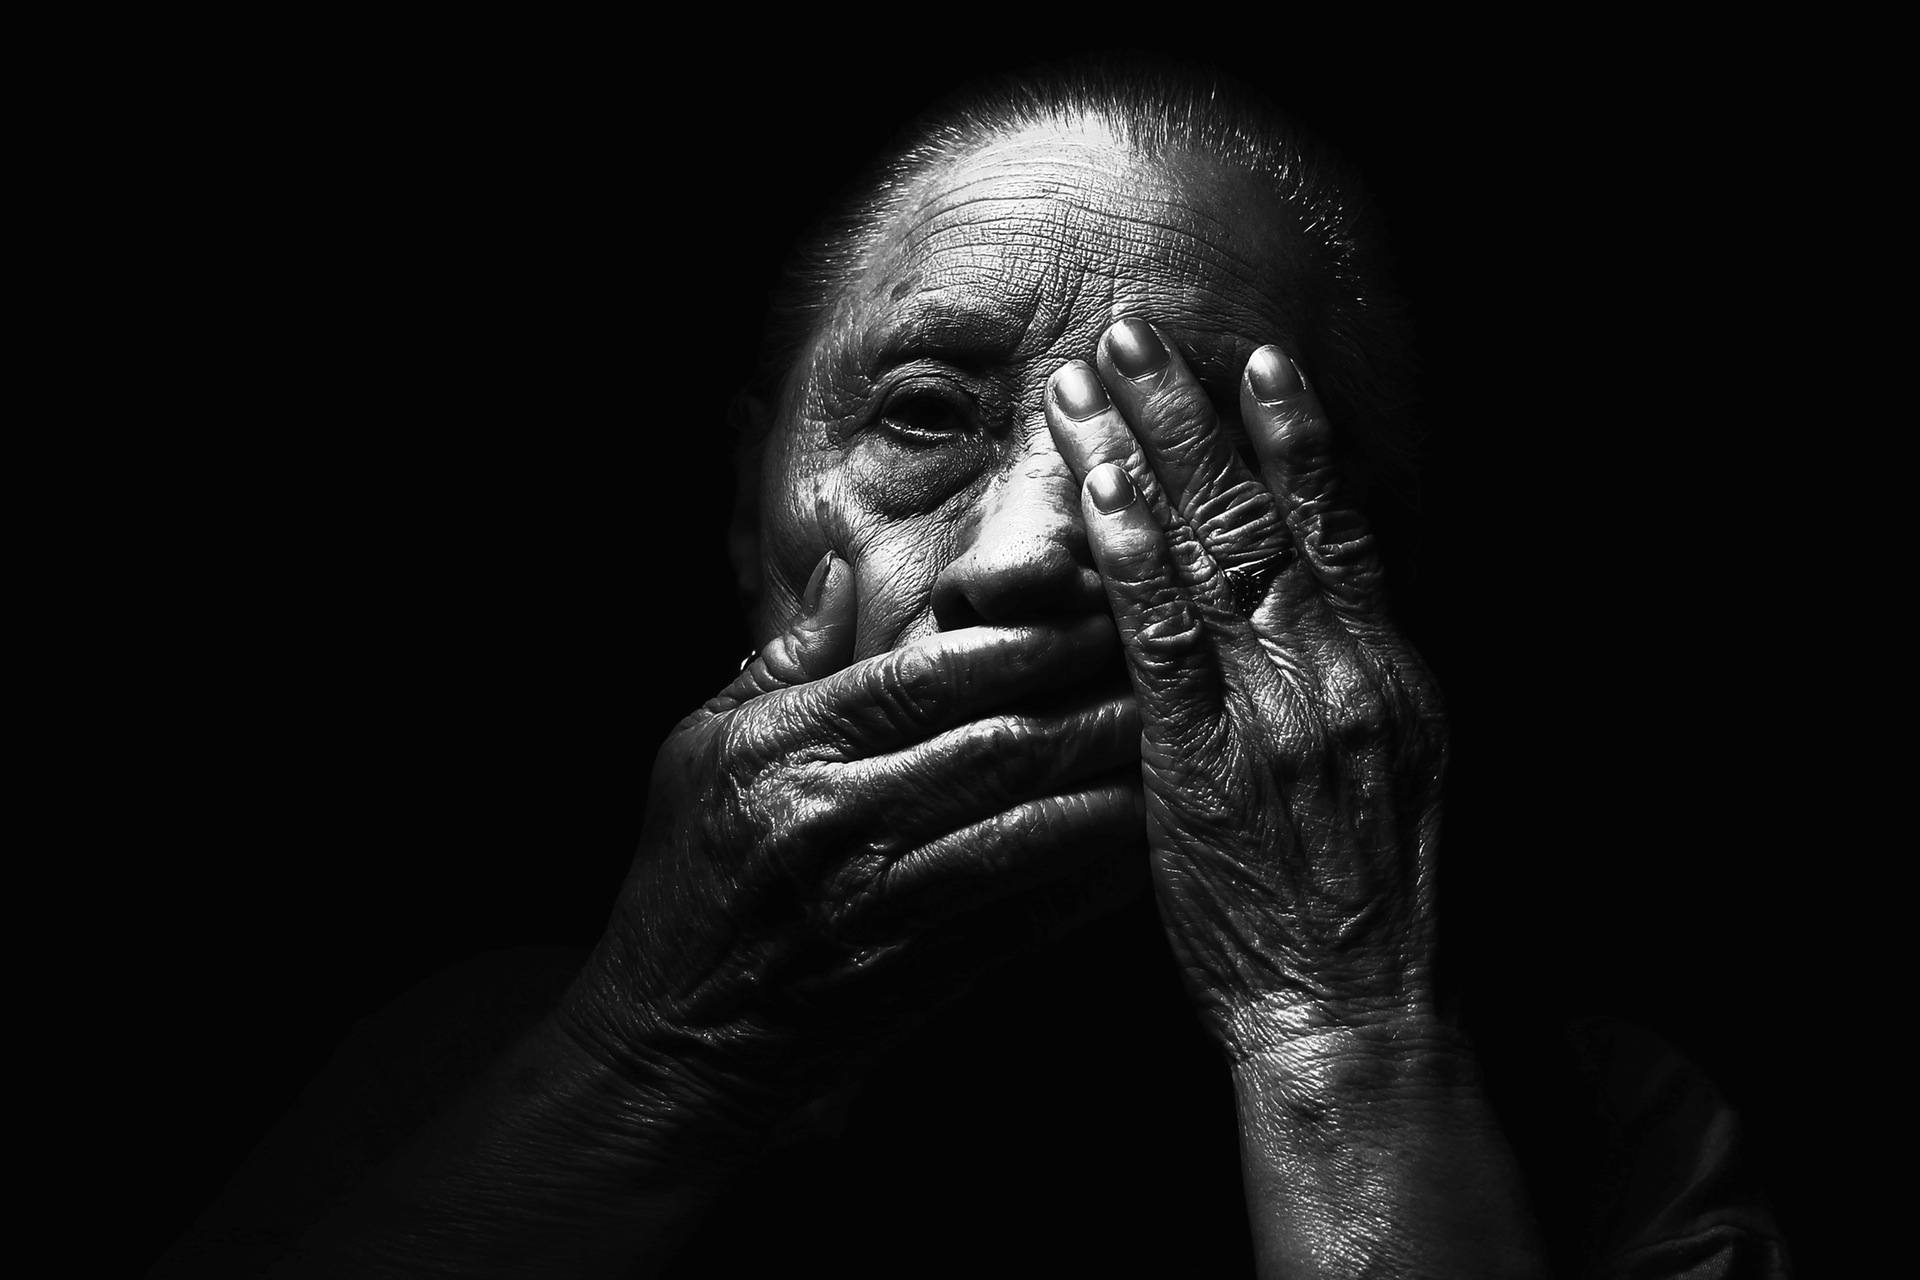 Woman places a hand over her mouth and eyes in low light, greyscale image